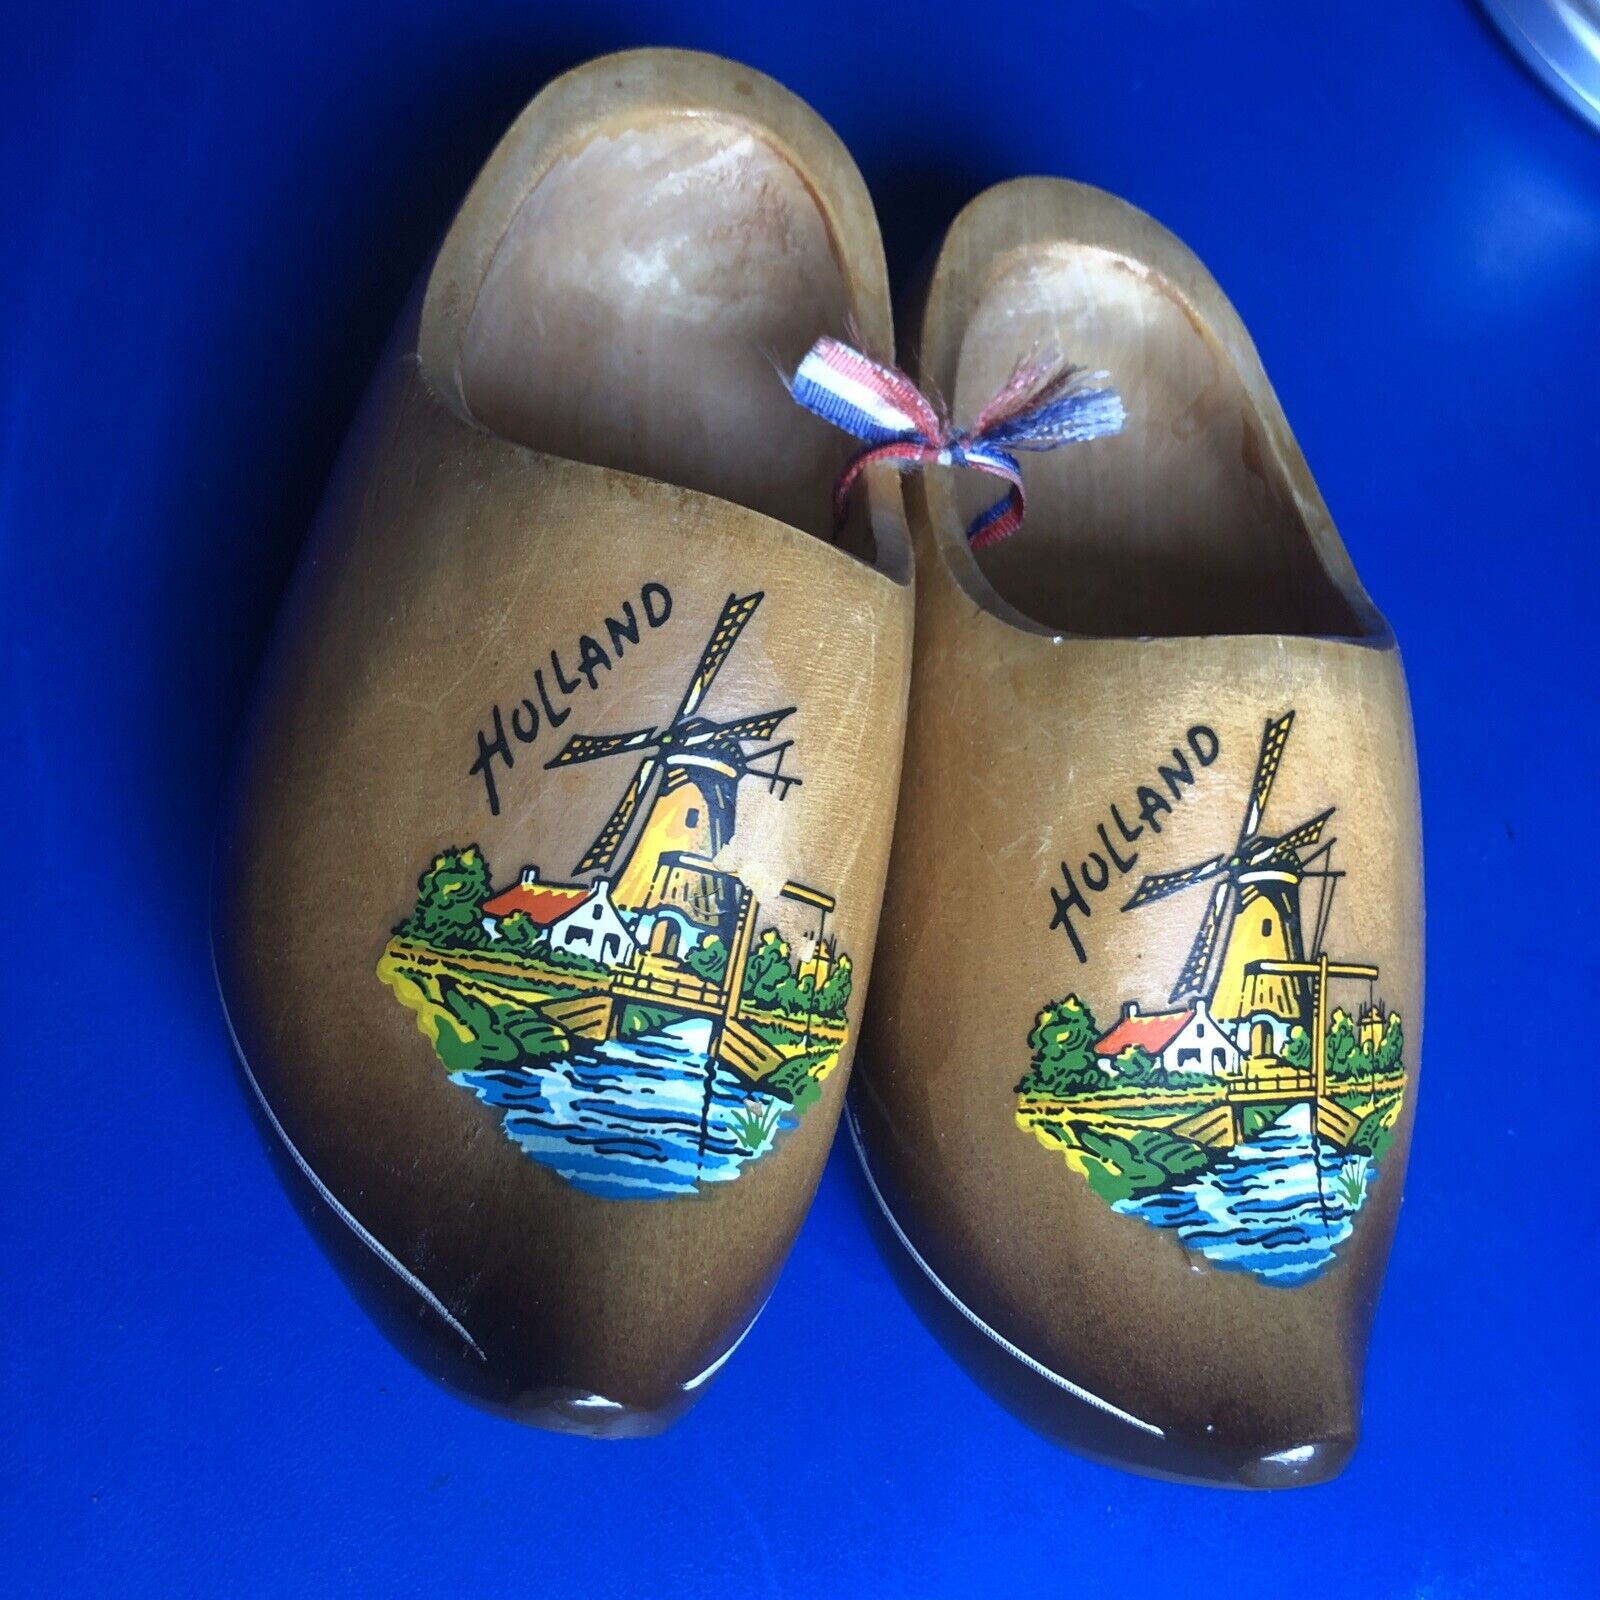 Hand Crafted Shoes Hand Made Natuurlijk Goed Hand Painted Wood Dutch Swedish...